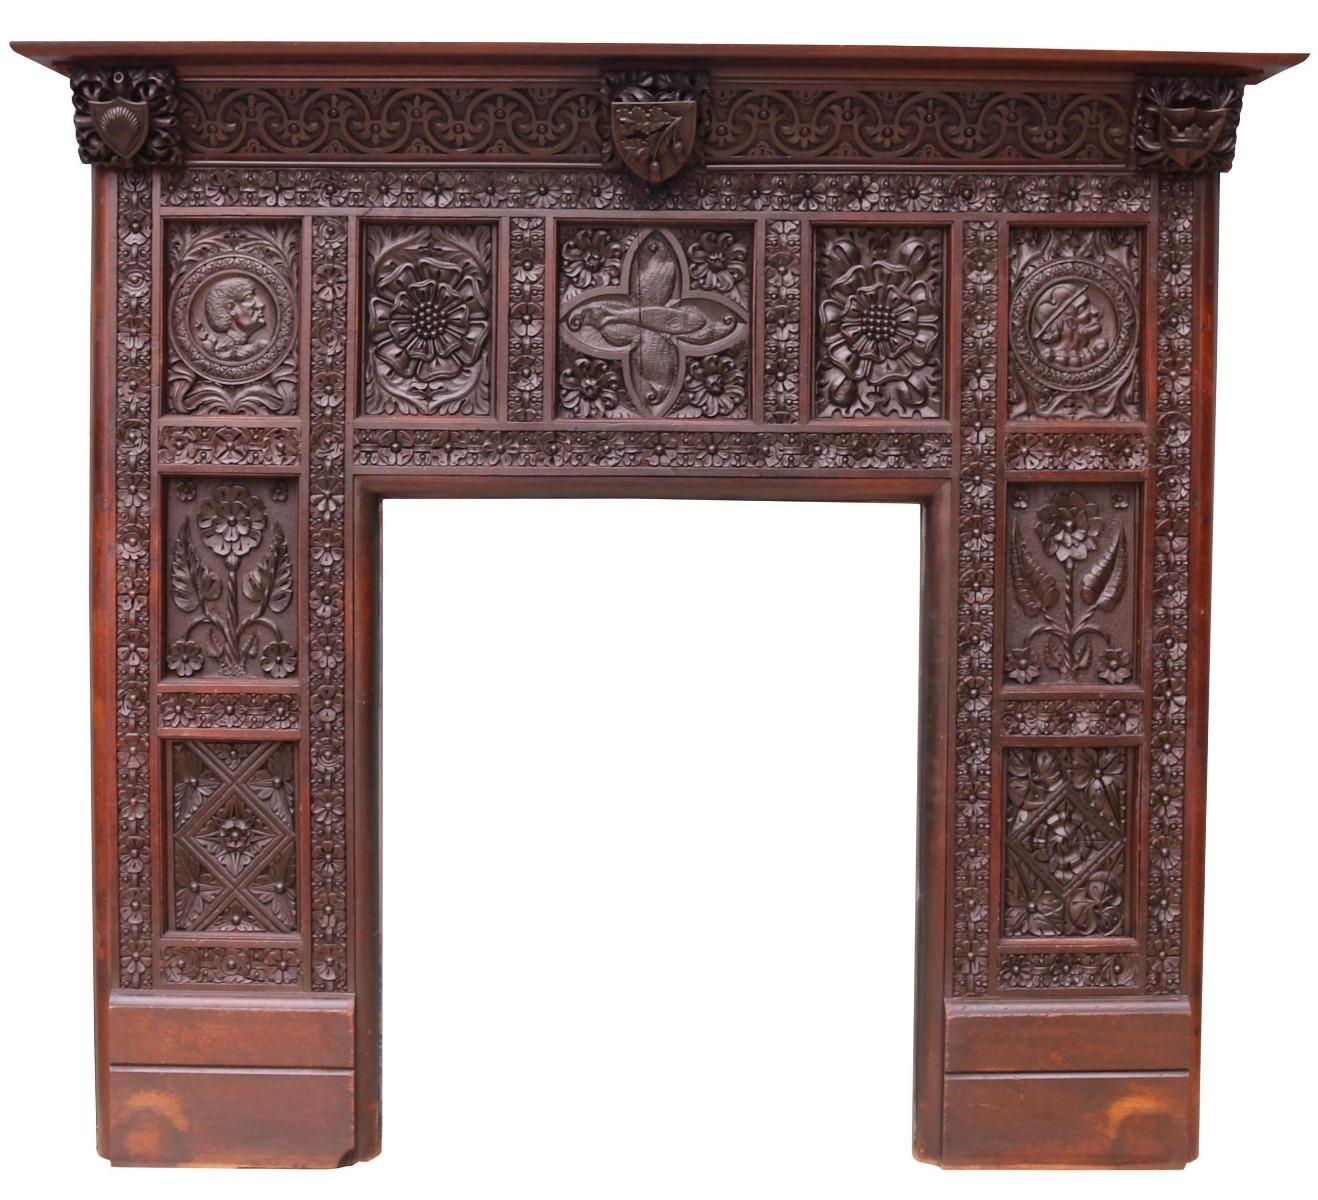 A Jacobean revival style fire surround salvaged from a large country house near Petersfield, Hampshire.
We also have a large run of matching dado height panelling available
Additional dimensions:
Opening height 98.5 cm
Opening width 78.5